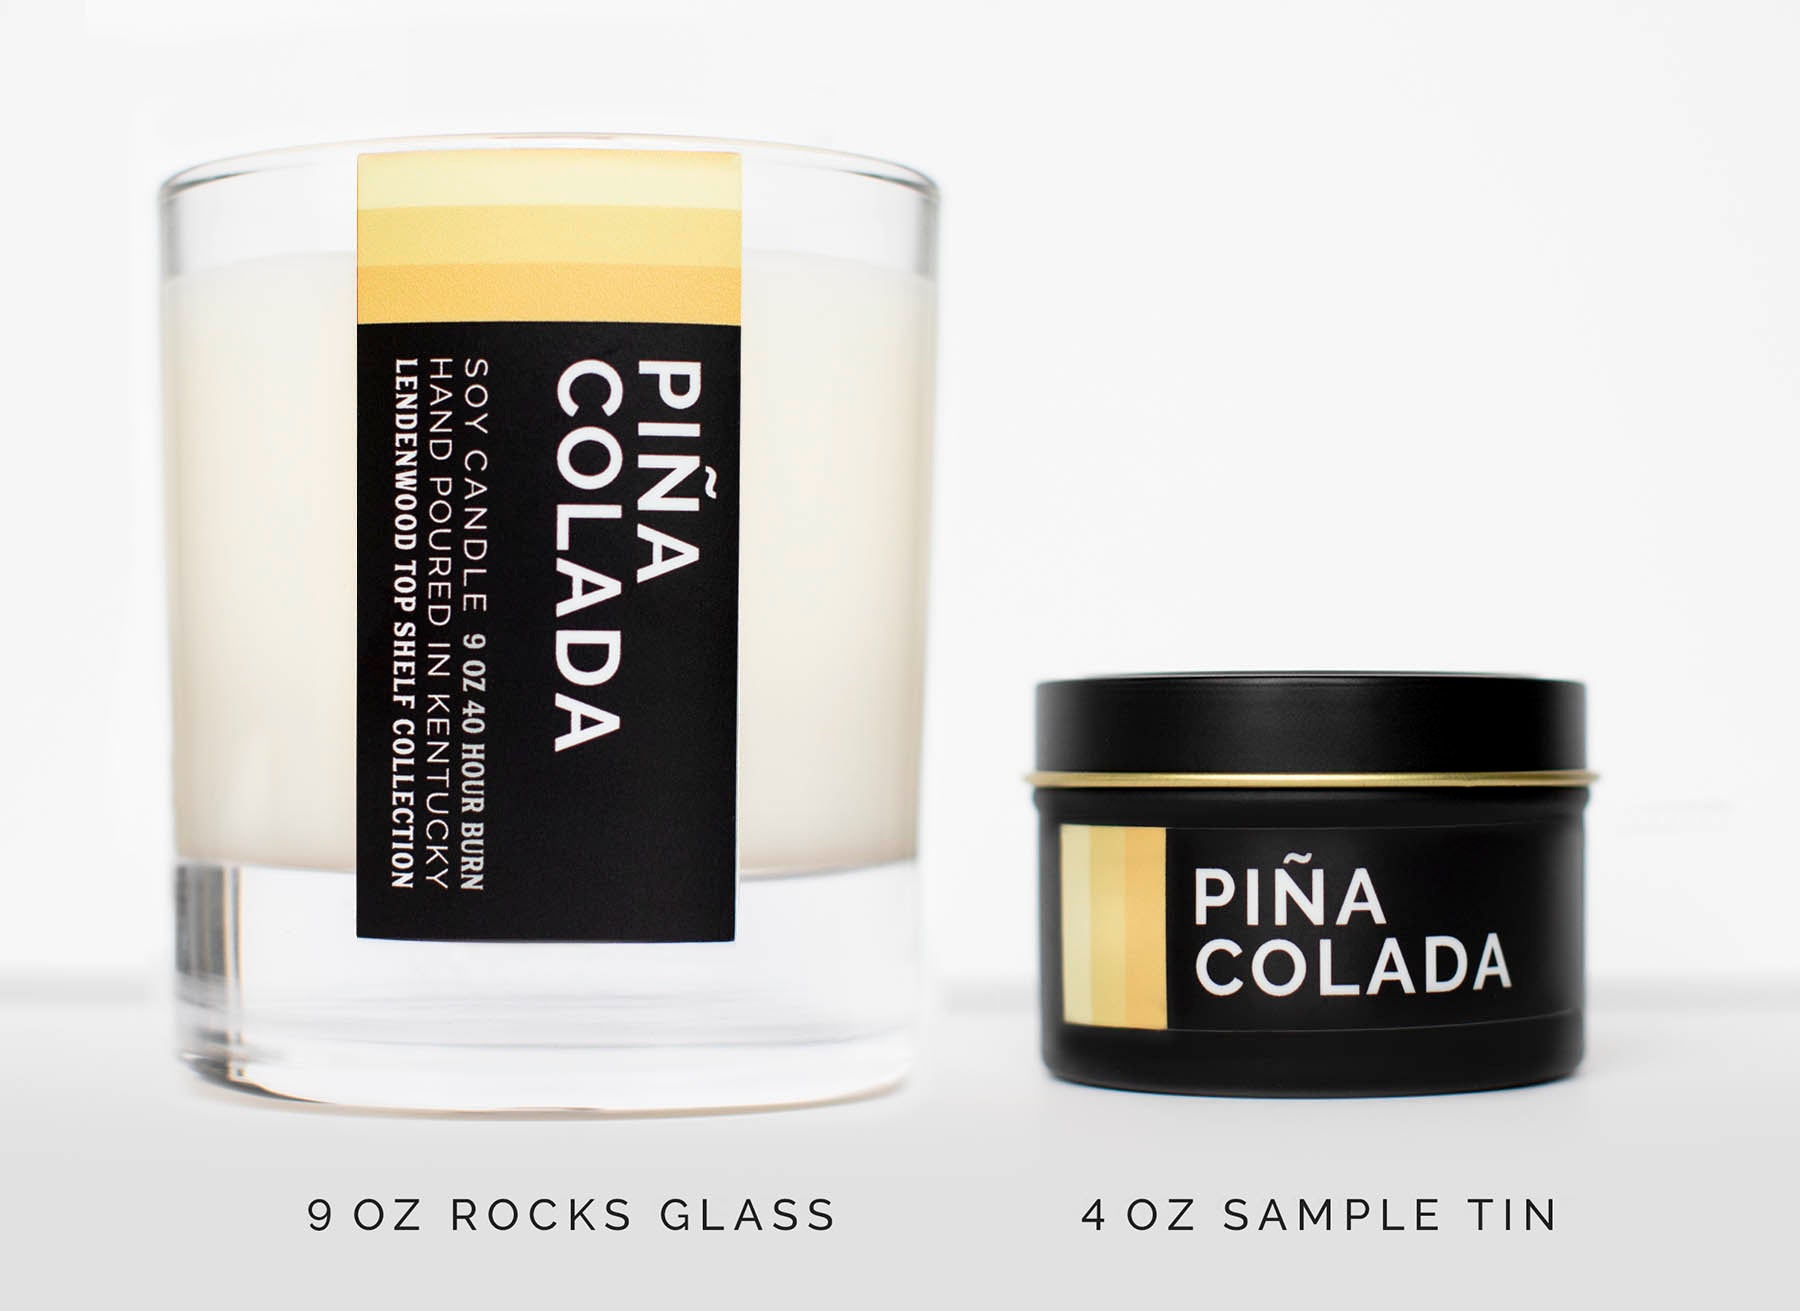 Pina Colada Scented Soy Candle